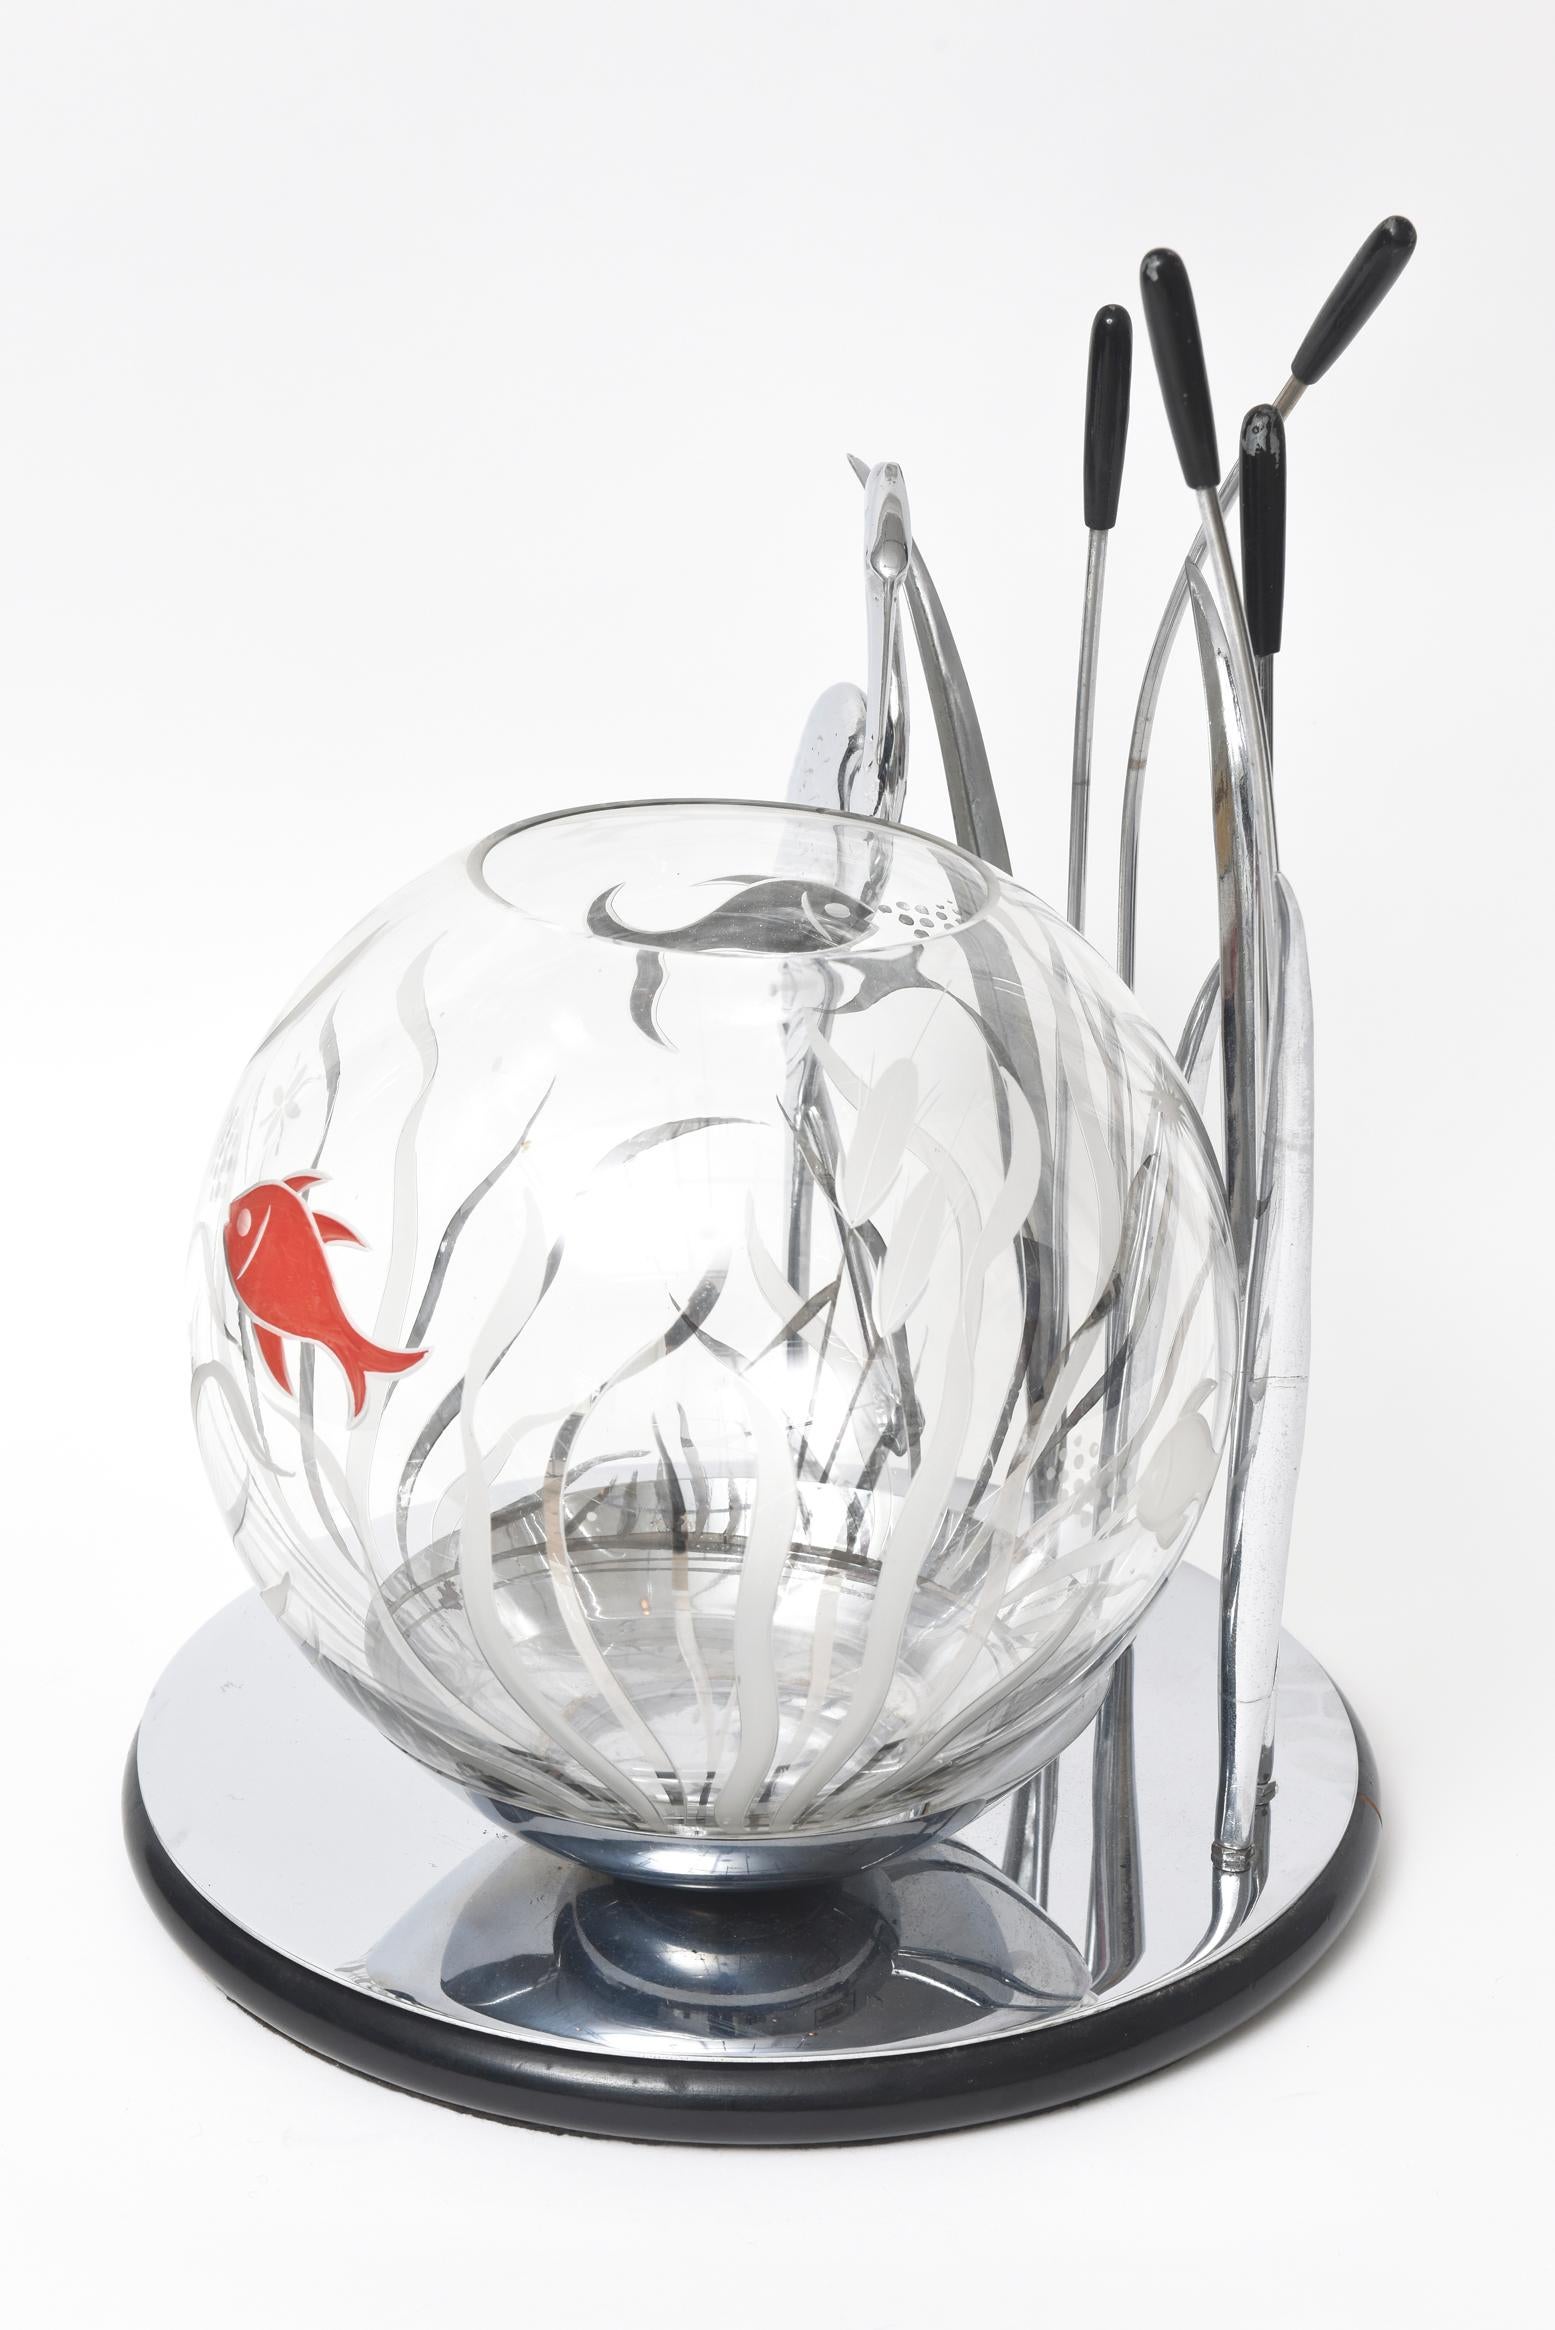 Art Deco Heron Bird and Cattails Chrome Sculpture with Glass Fish Bowl Aquarium In Good Condition For Sale In Miami Beach, FL